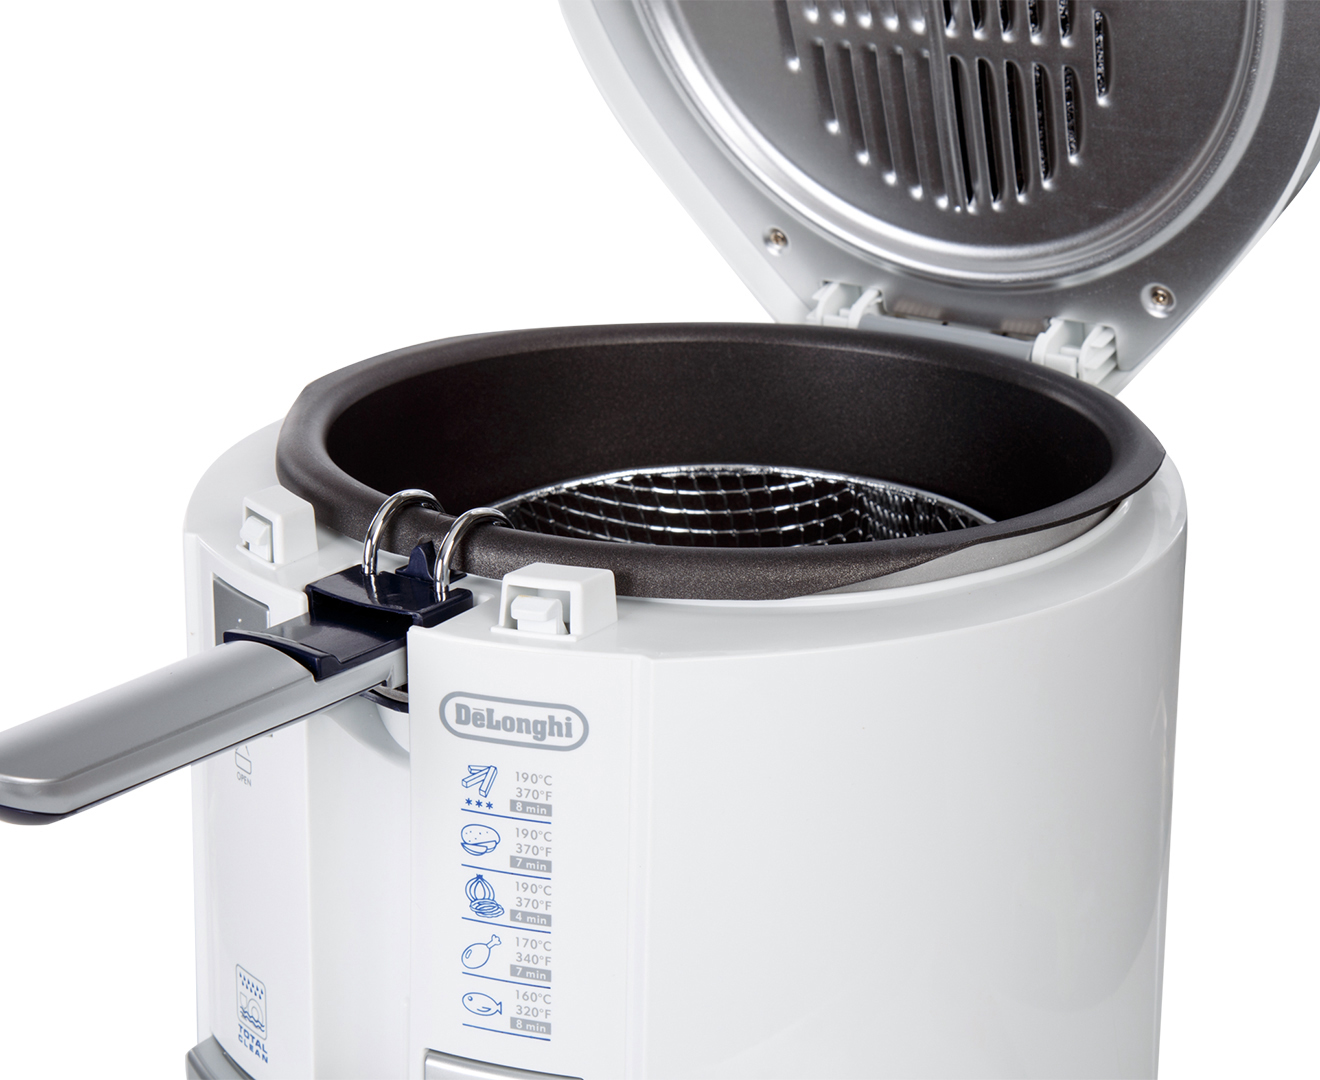 DeLonghi F26237 1800W Deep Fryer with Total Clean System (220V)